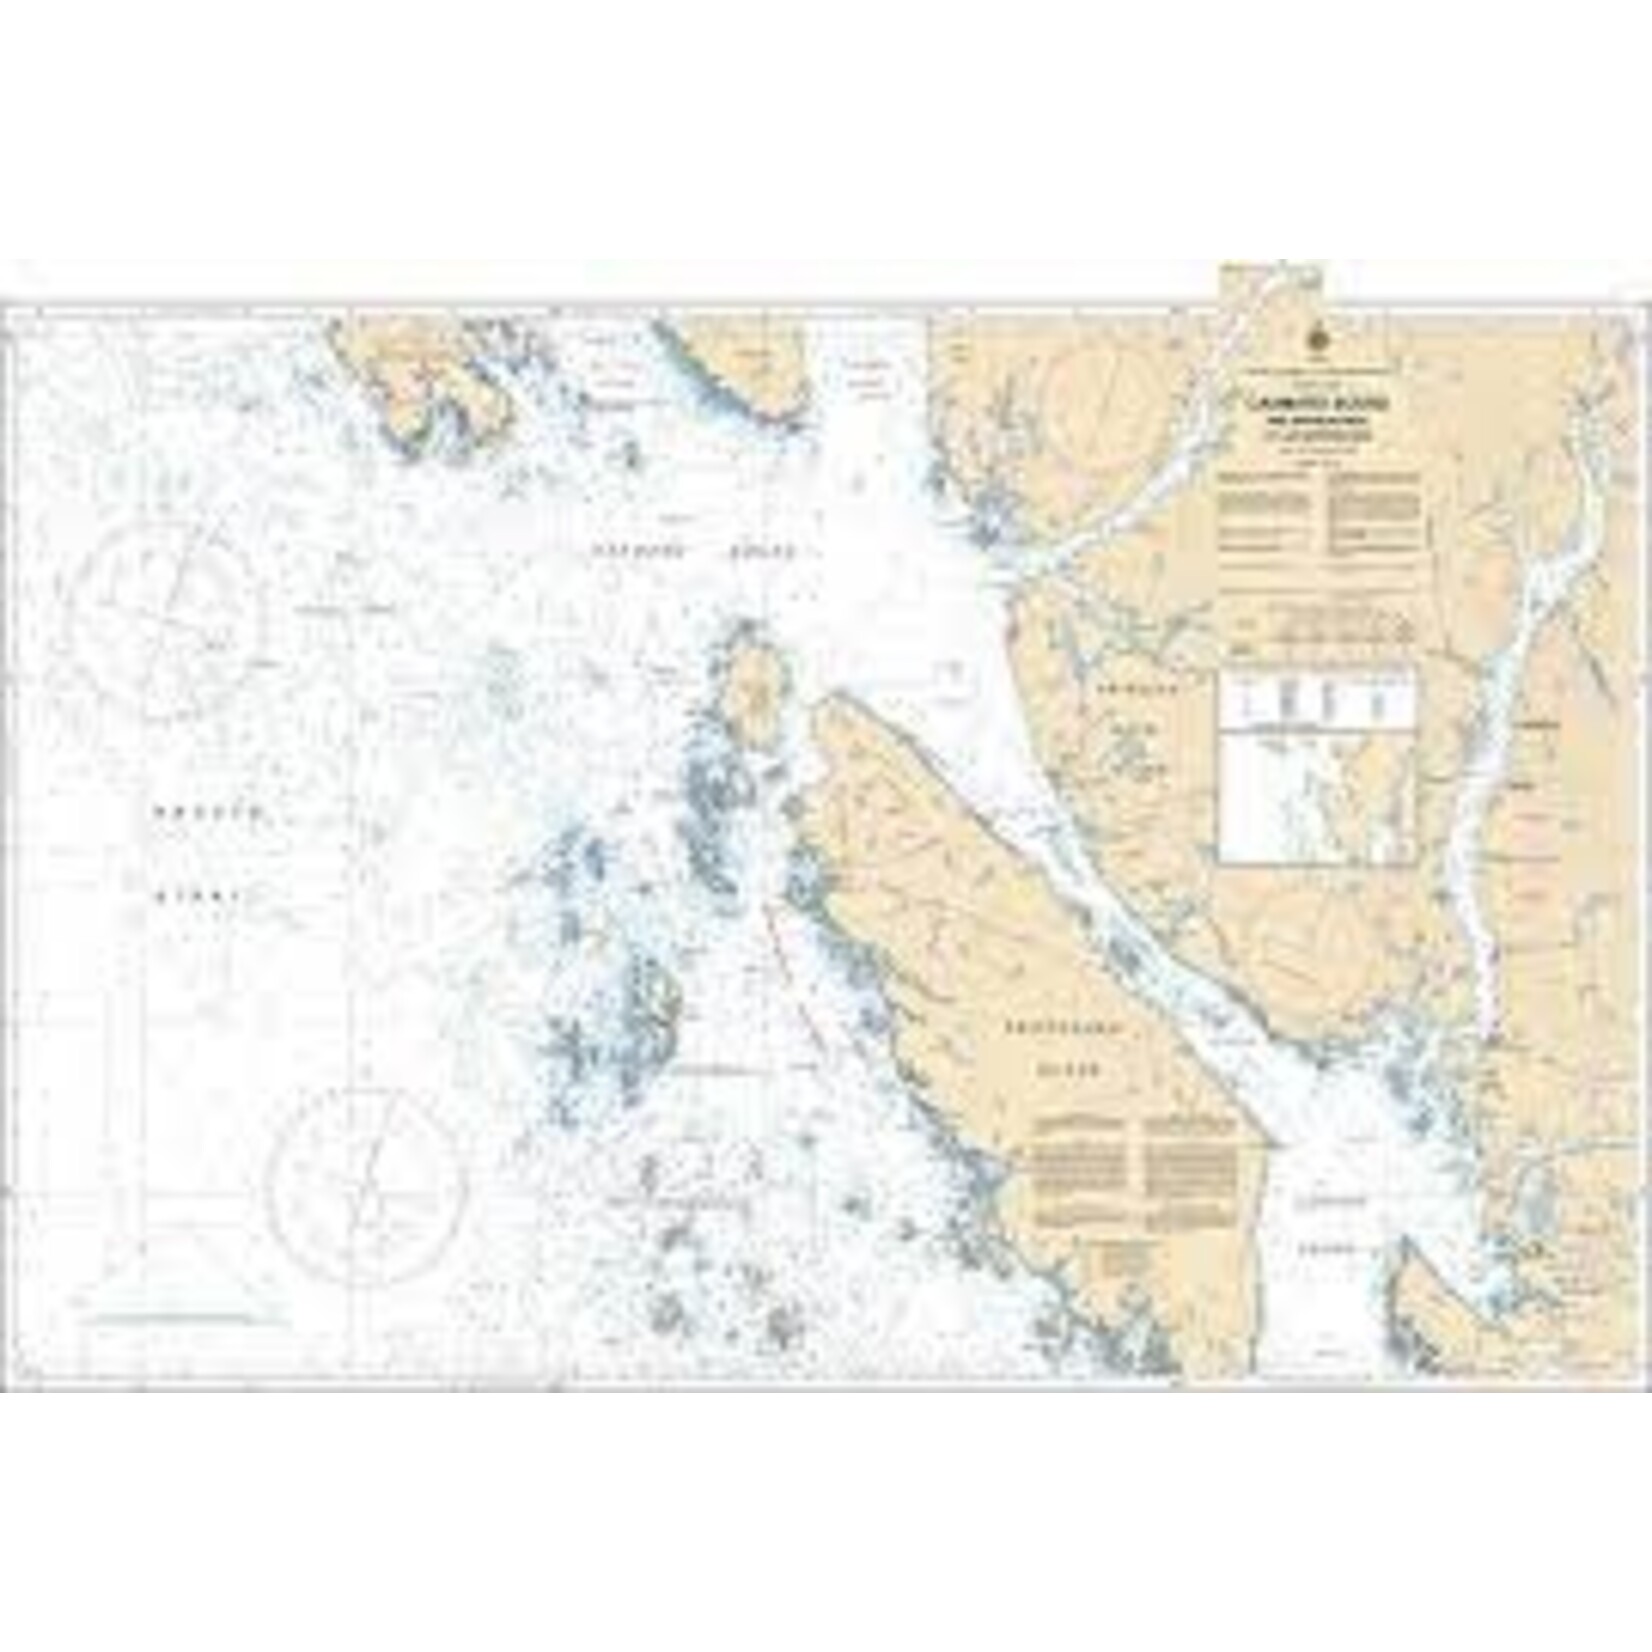 Nautical Charts - 3975 - Caamano Sound & Approches